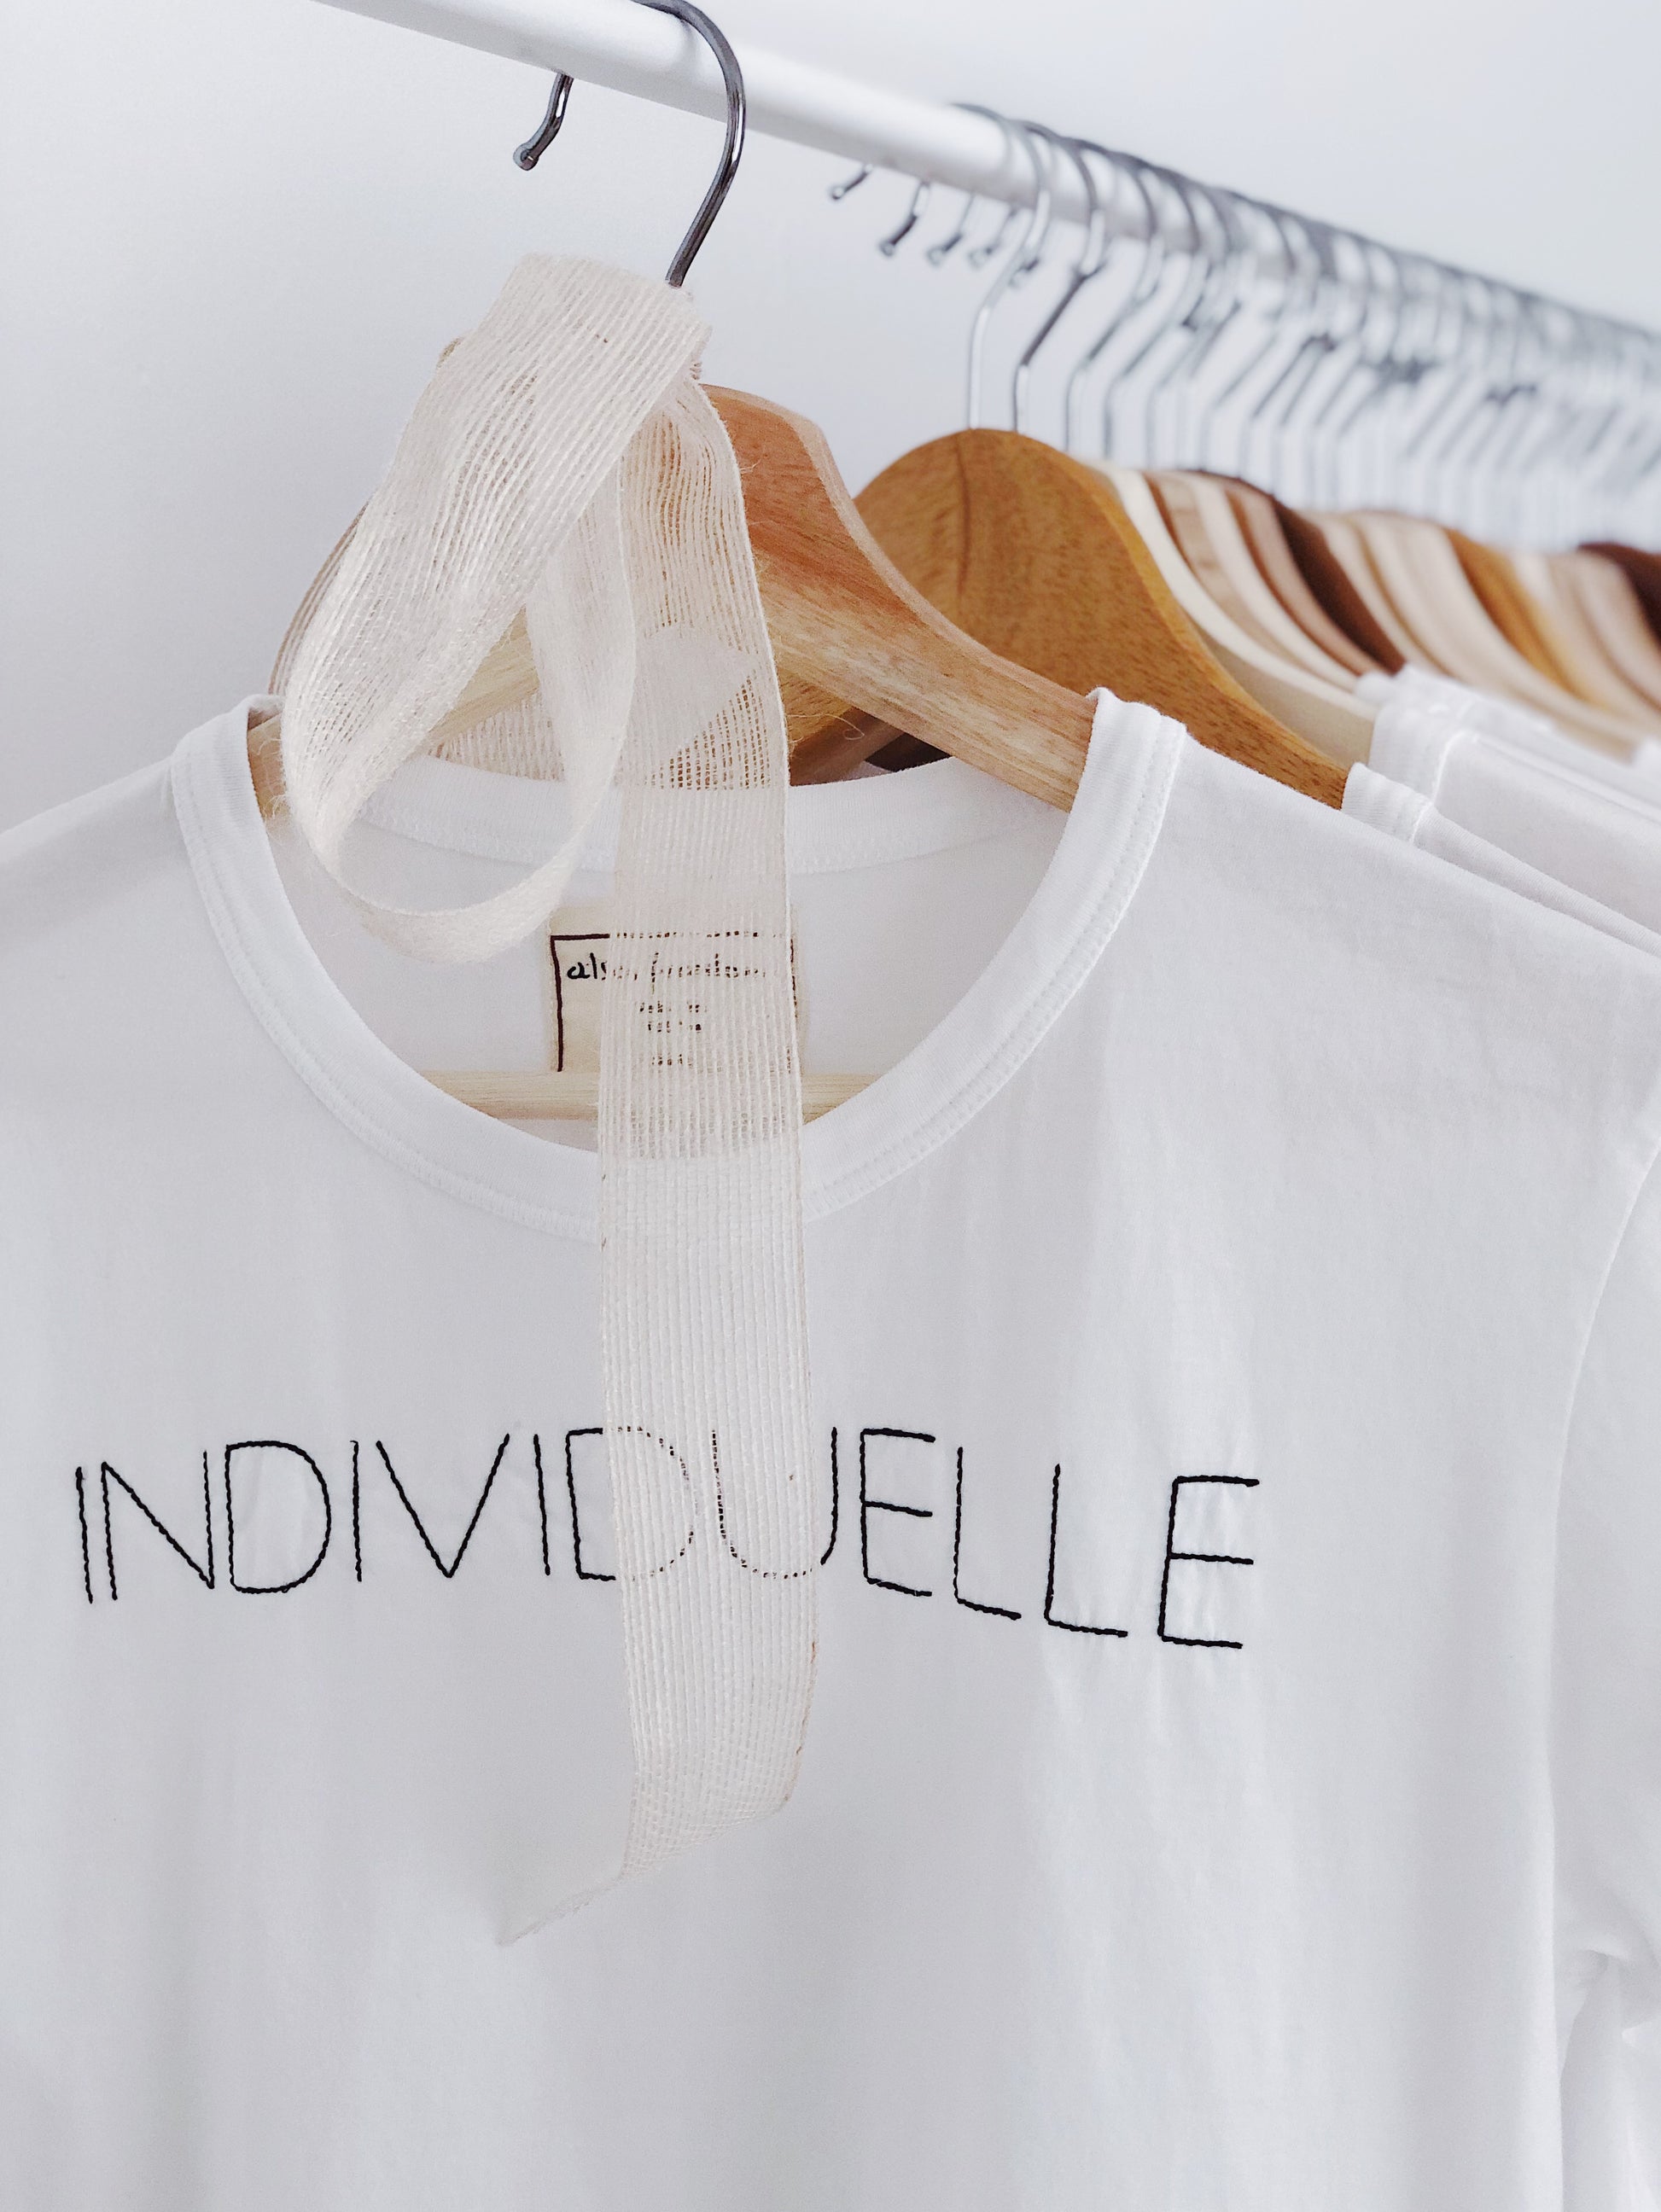 Individuelle, Baby Girl Tee - Also, Freedom